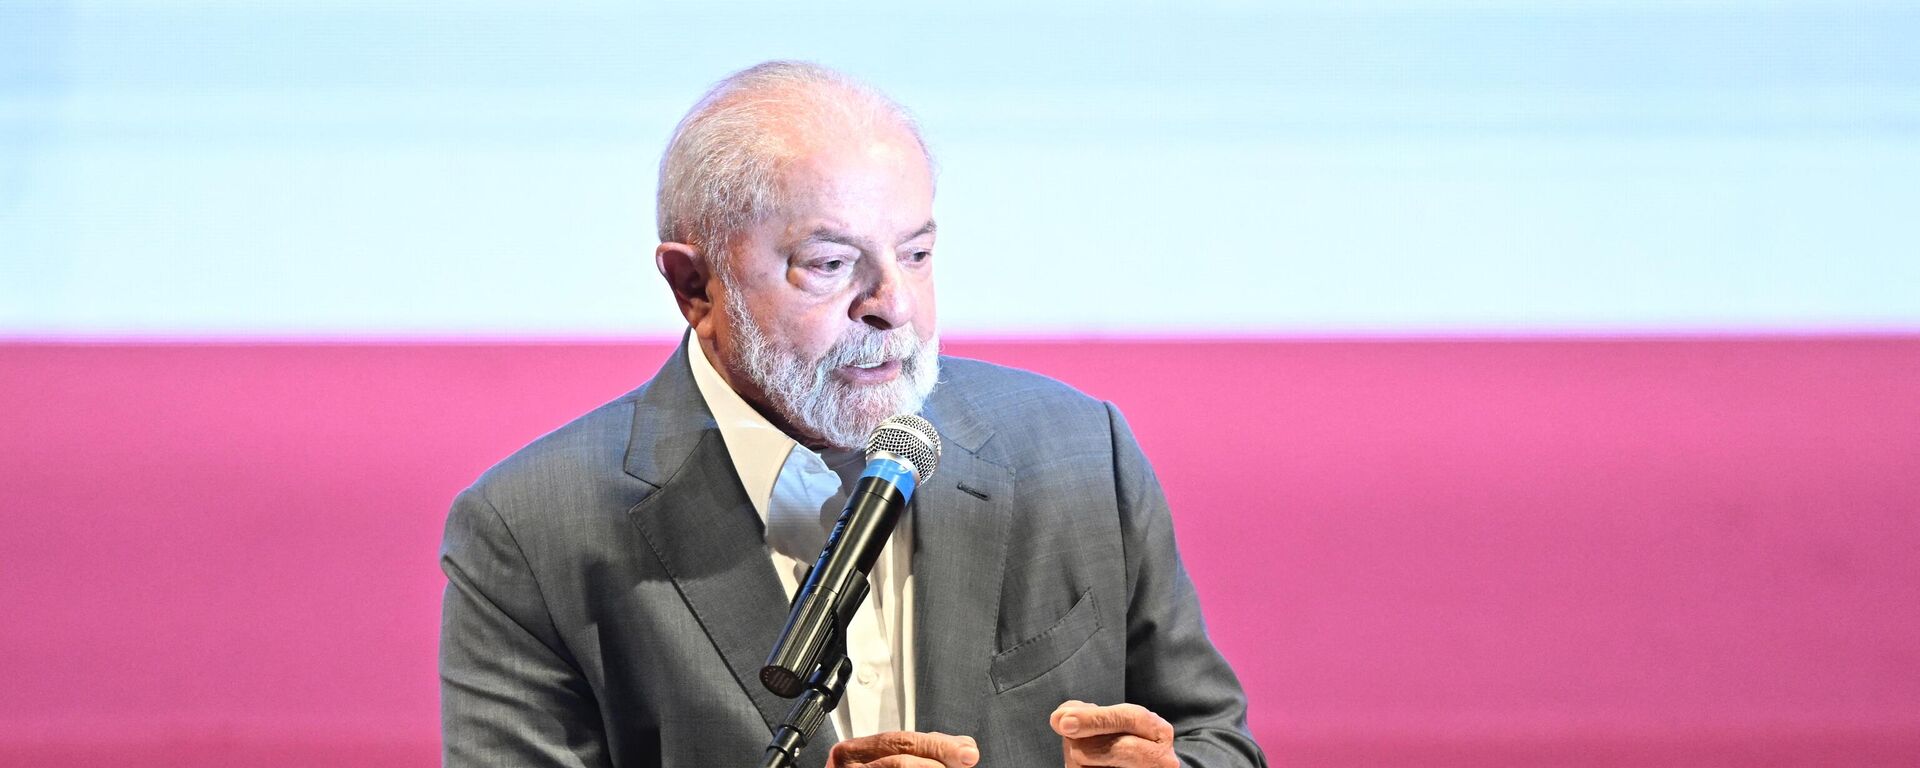 Brazilian President Luiz Inacio Lula da Silva speaks during the launching ceremony of the federal government's PAC (Growth Accelerated Program) at the Municipal Theater in Rio de Janeiro, Brazil on August 11, 2023 - Sputnik Africa, 1920, 22.08.2023